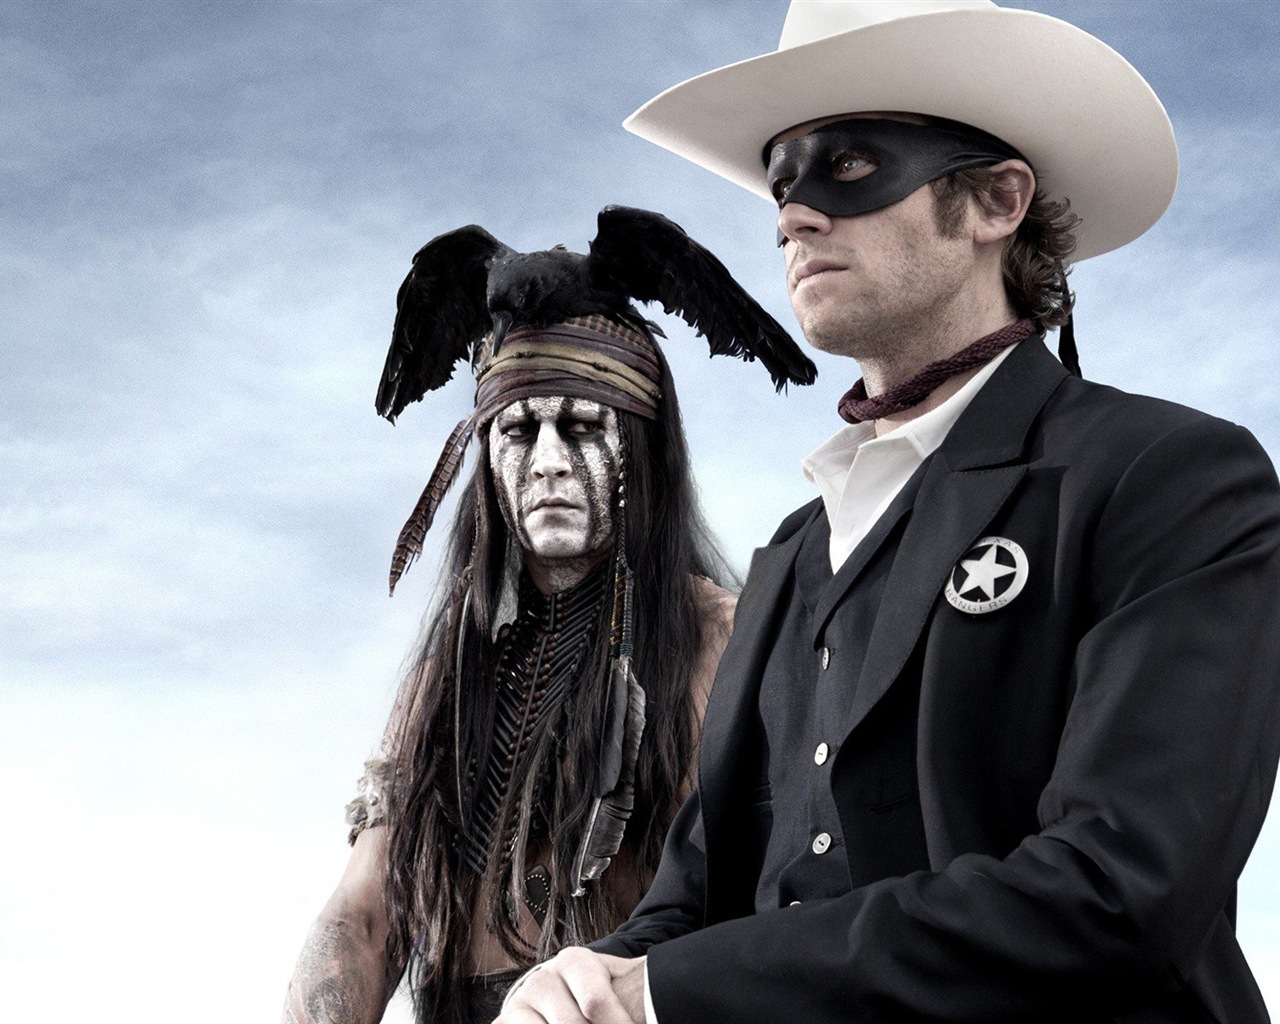 The Lone Ranger HD movie wallpapers #2 - 1280x1024